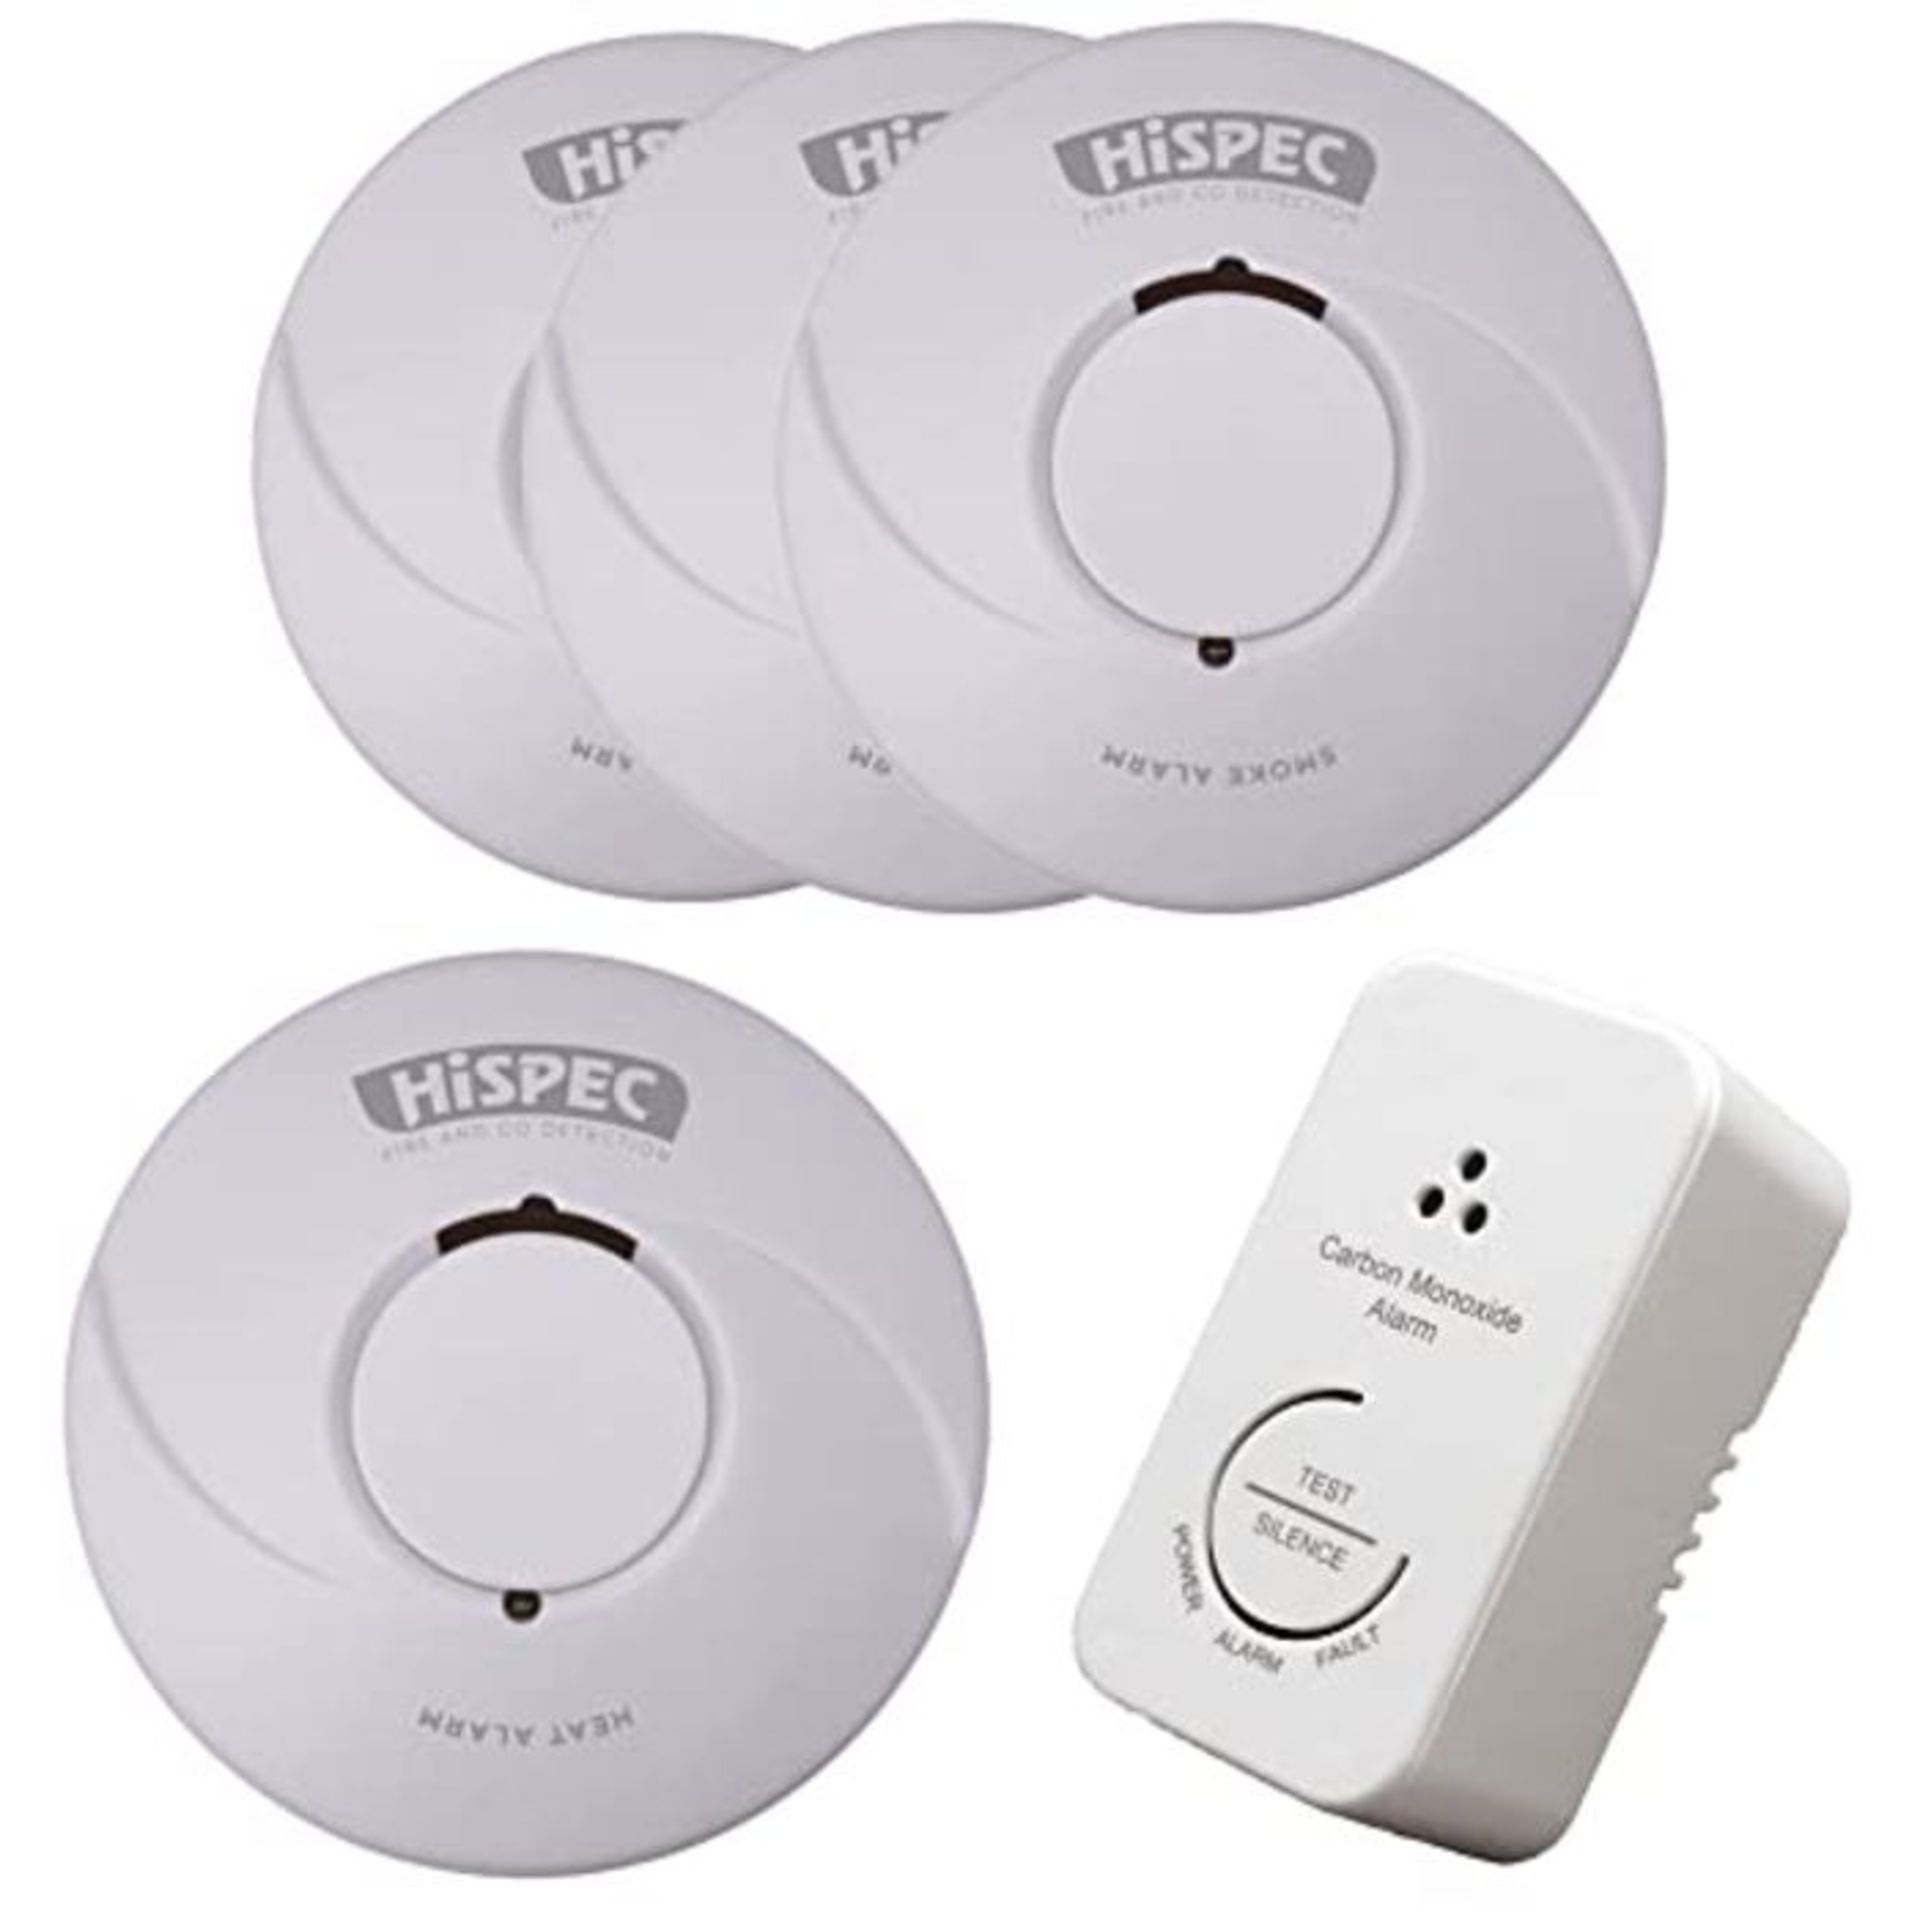 RRP £117.00 HiSPEC Smoke Alarms Heat Detectors and CO Detectors - Fire Safety Kits: Fully Complian